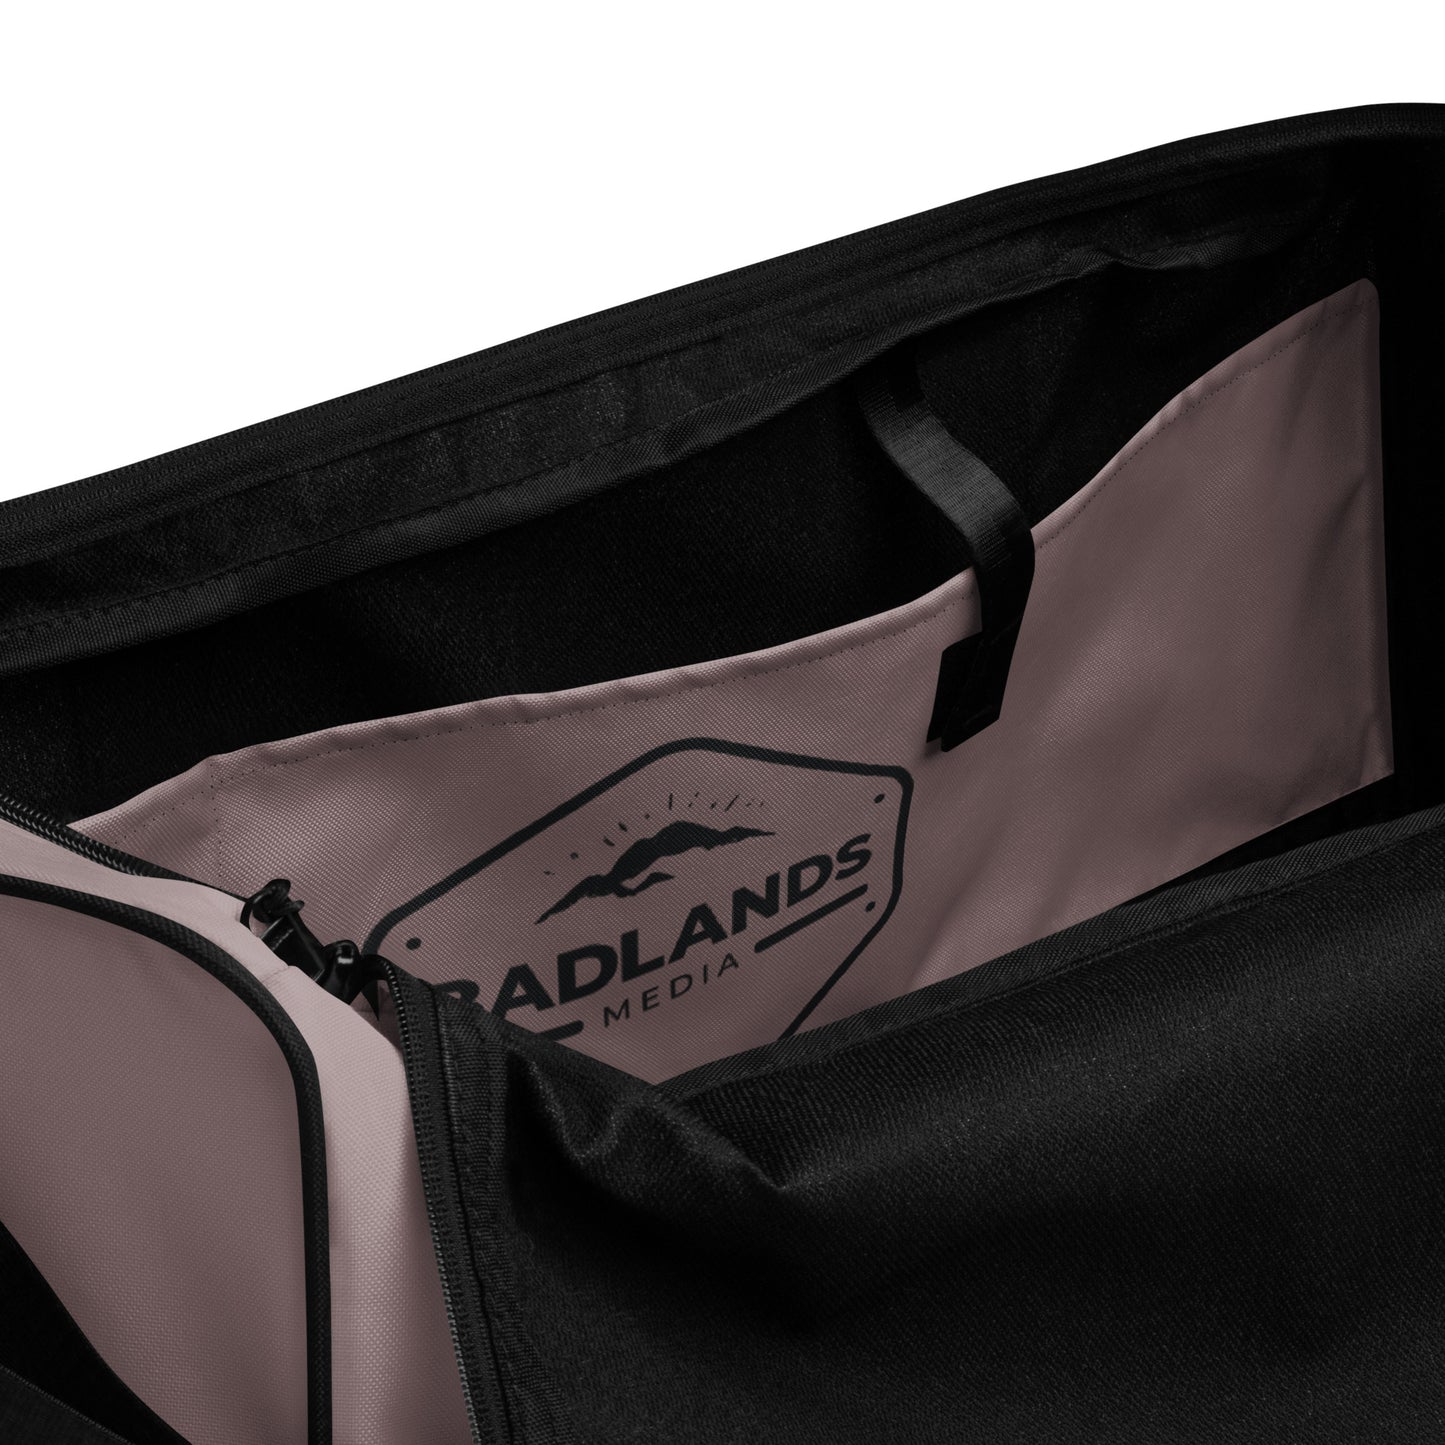 Badlands Extra Large Duffle Bag in pebble